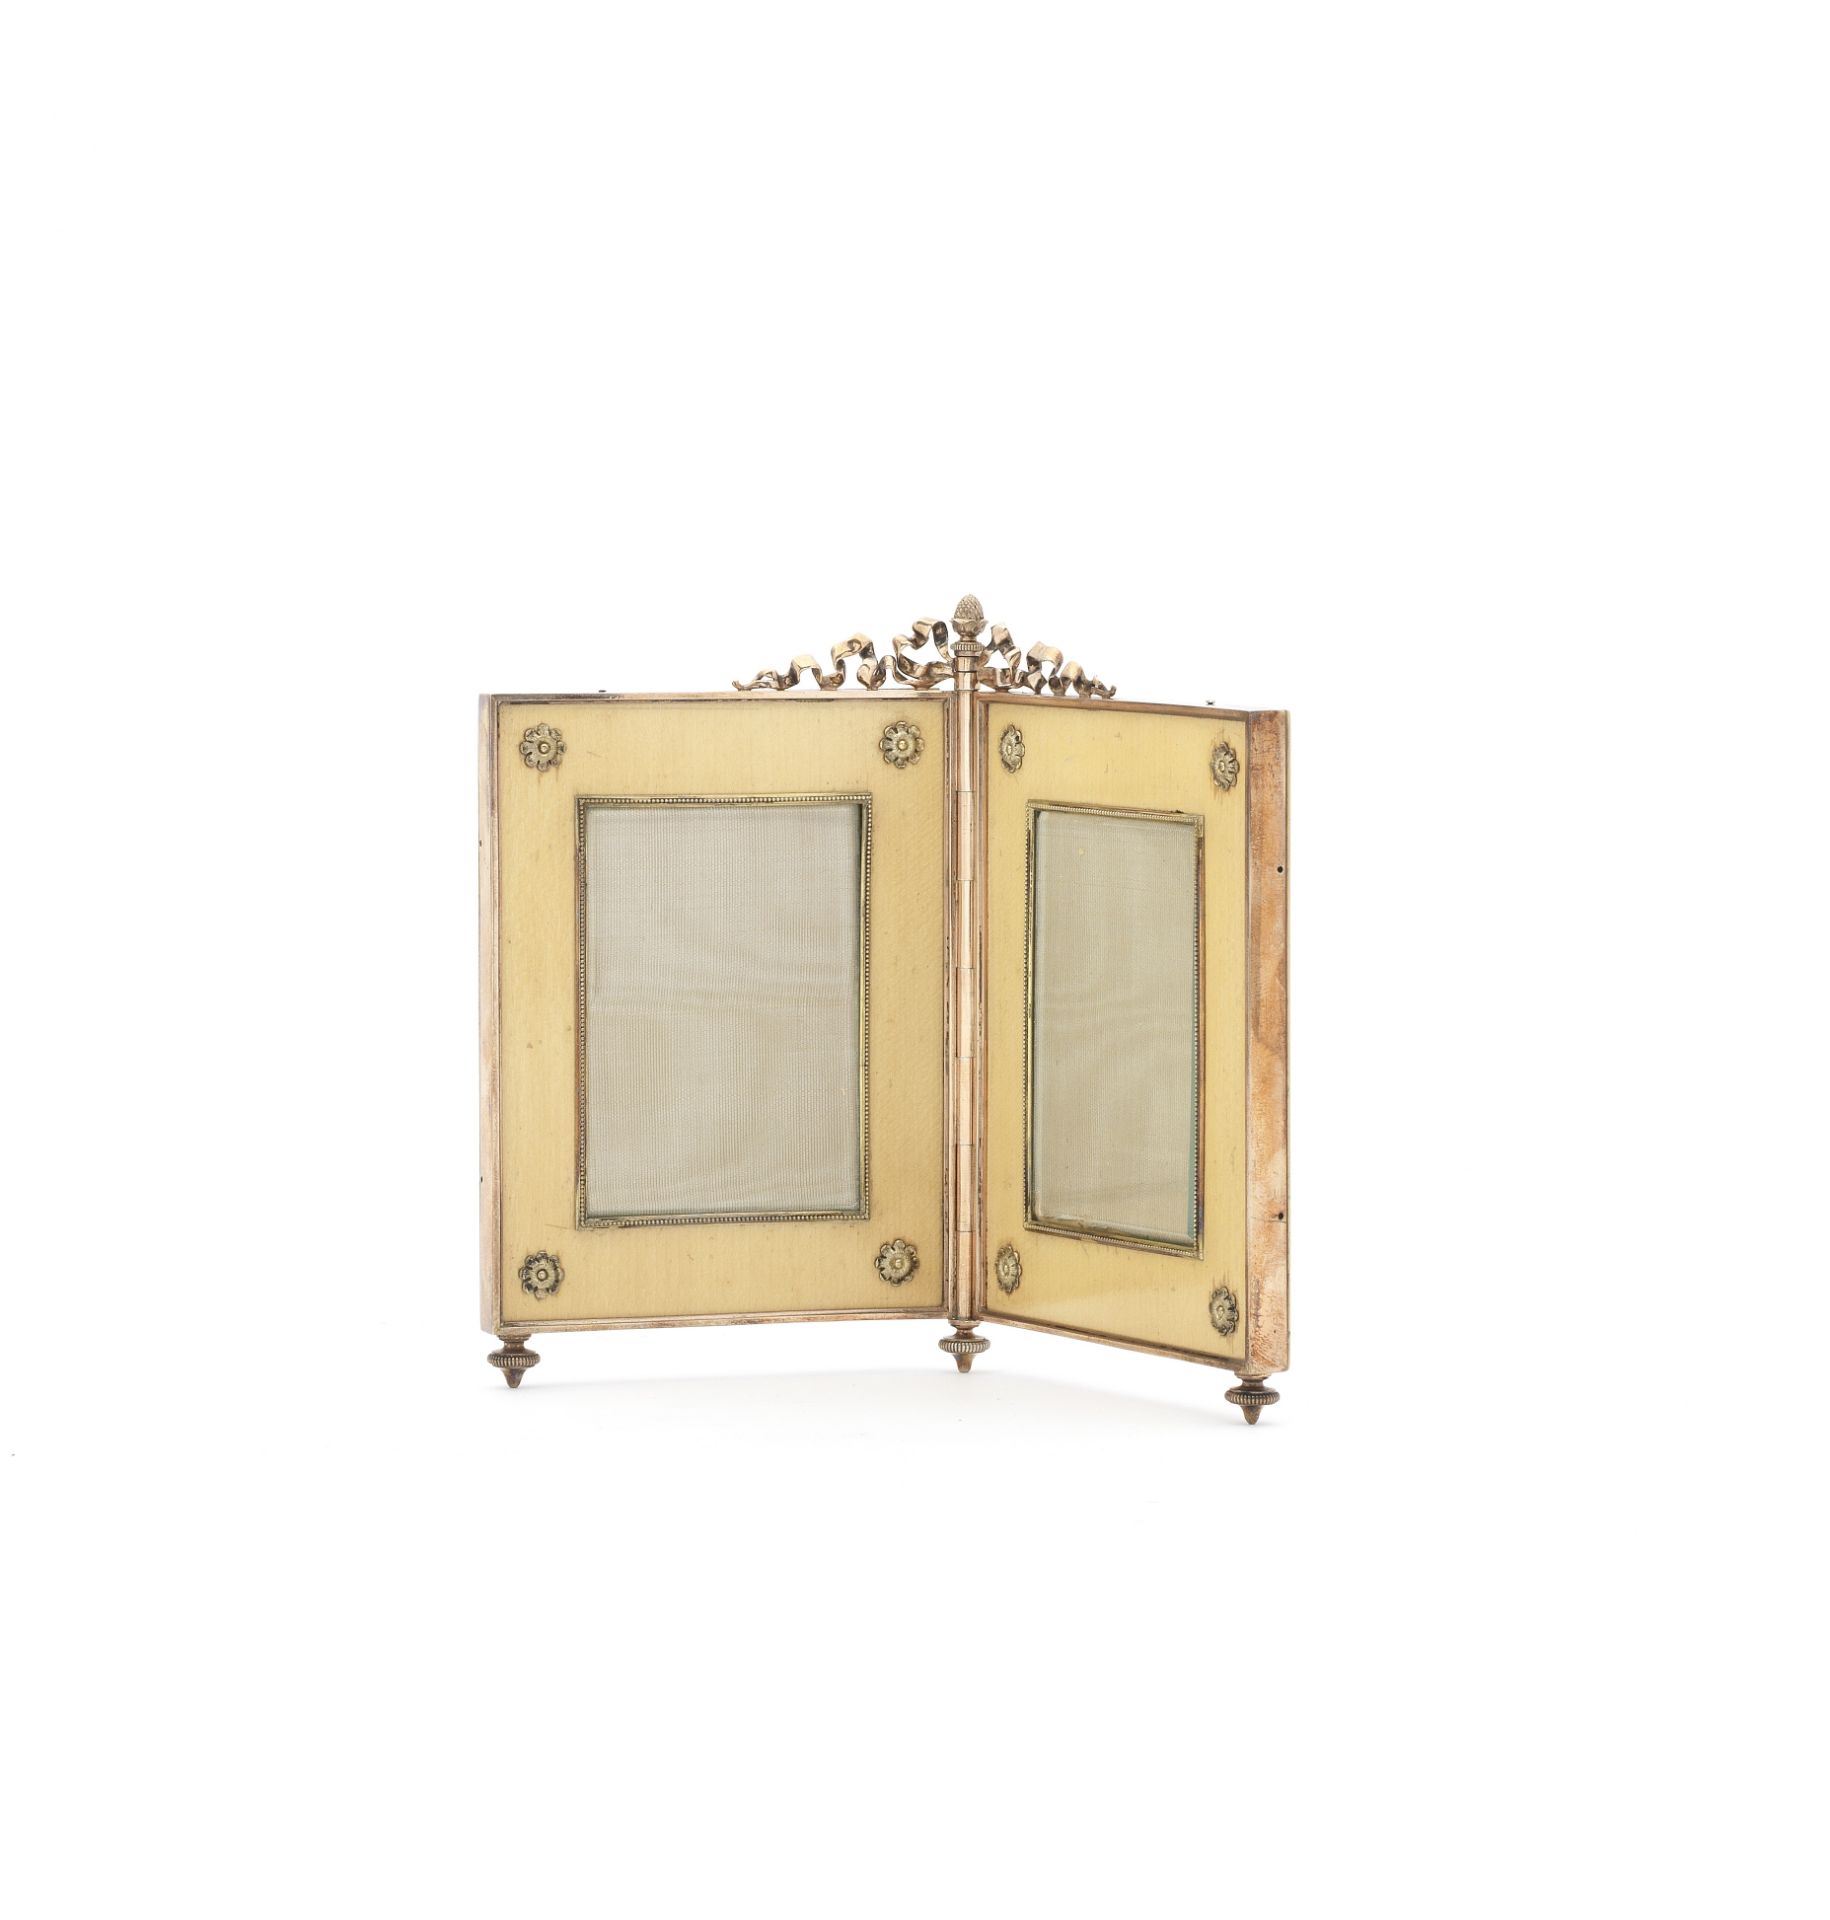 A silver-gilt and wood double photograph frameFabergé, workmaster Anders Nevalainen, St. Petersbu...